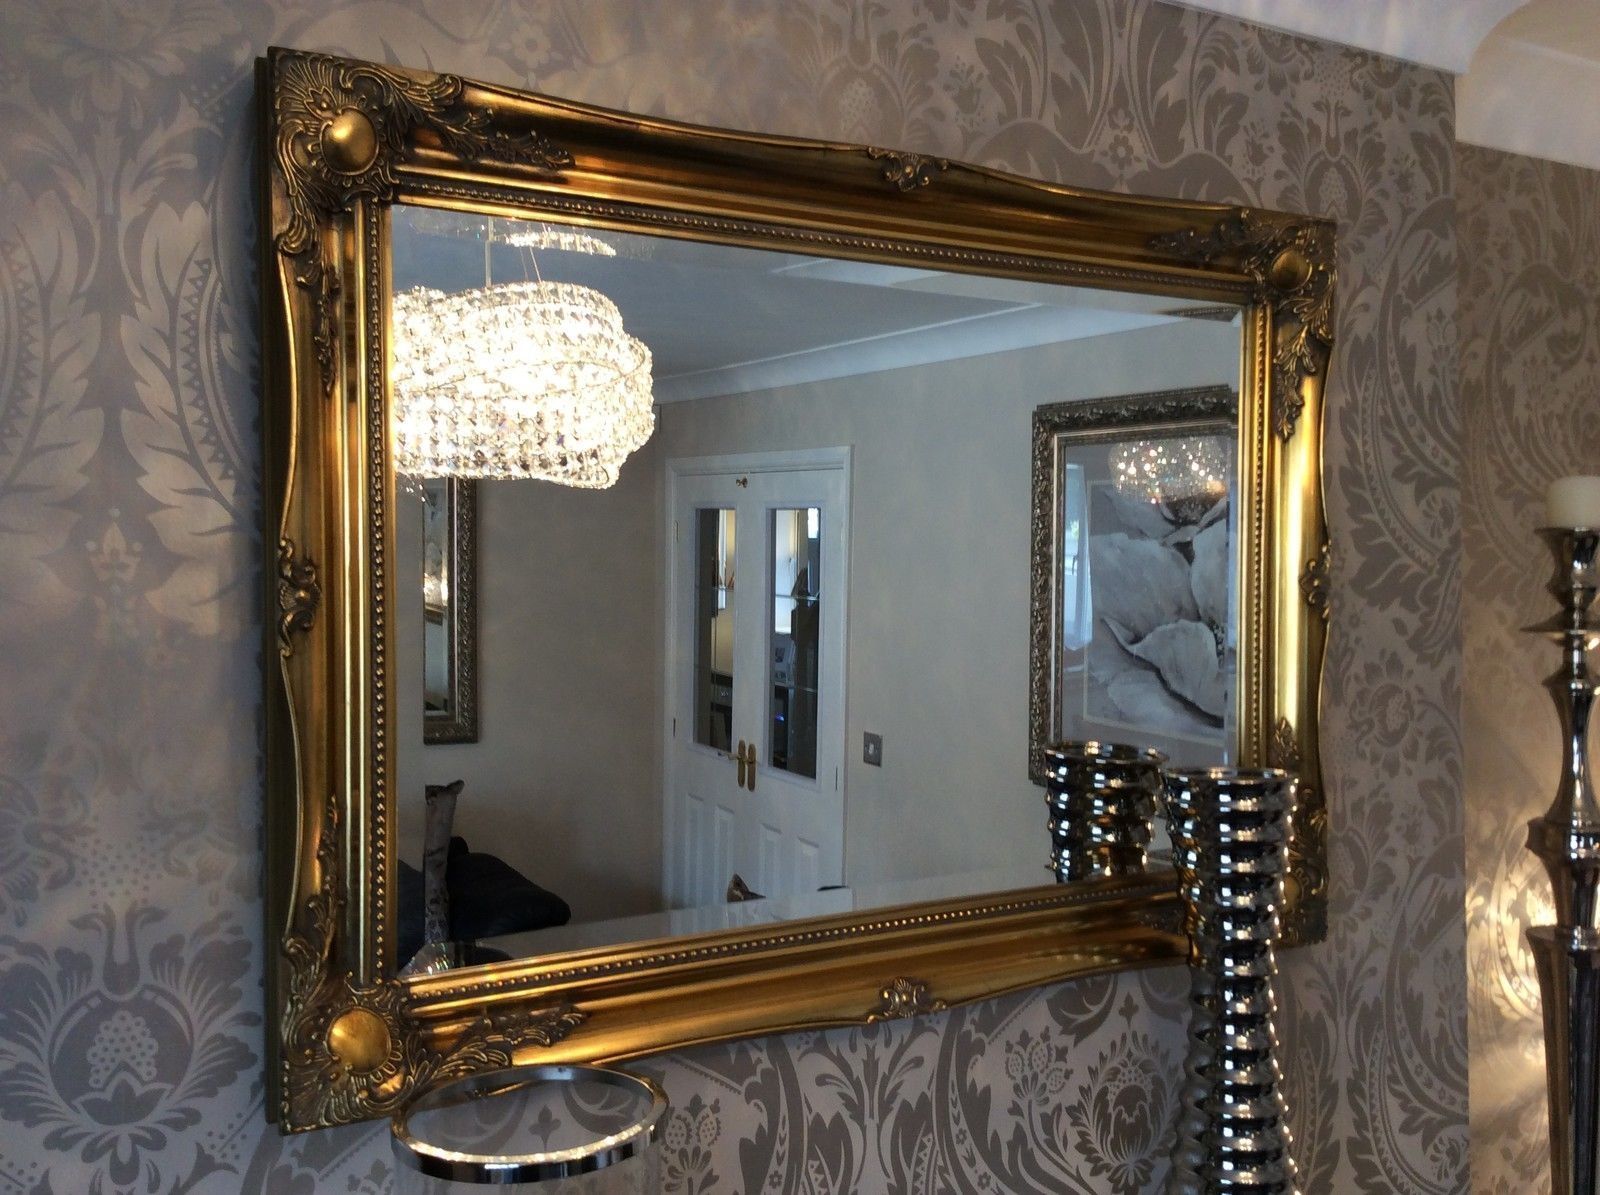 Classic Impression On Antique Wall Mirrors Vwho Throughout Antique Wall Mirrors Large (View 15 of 15)